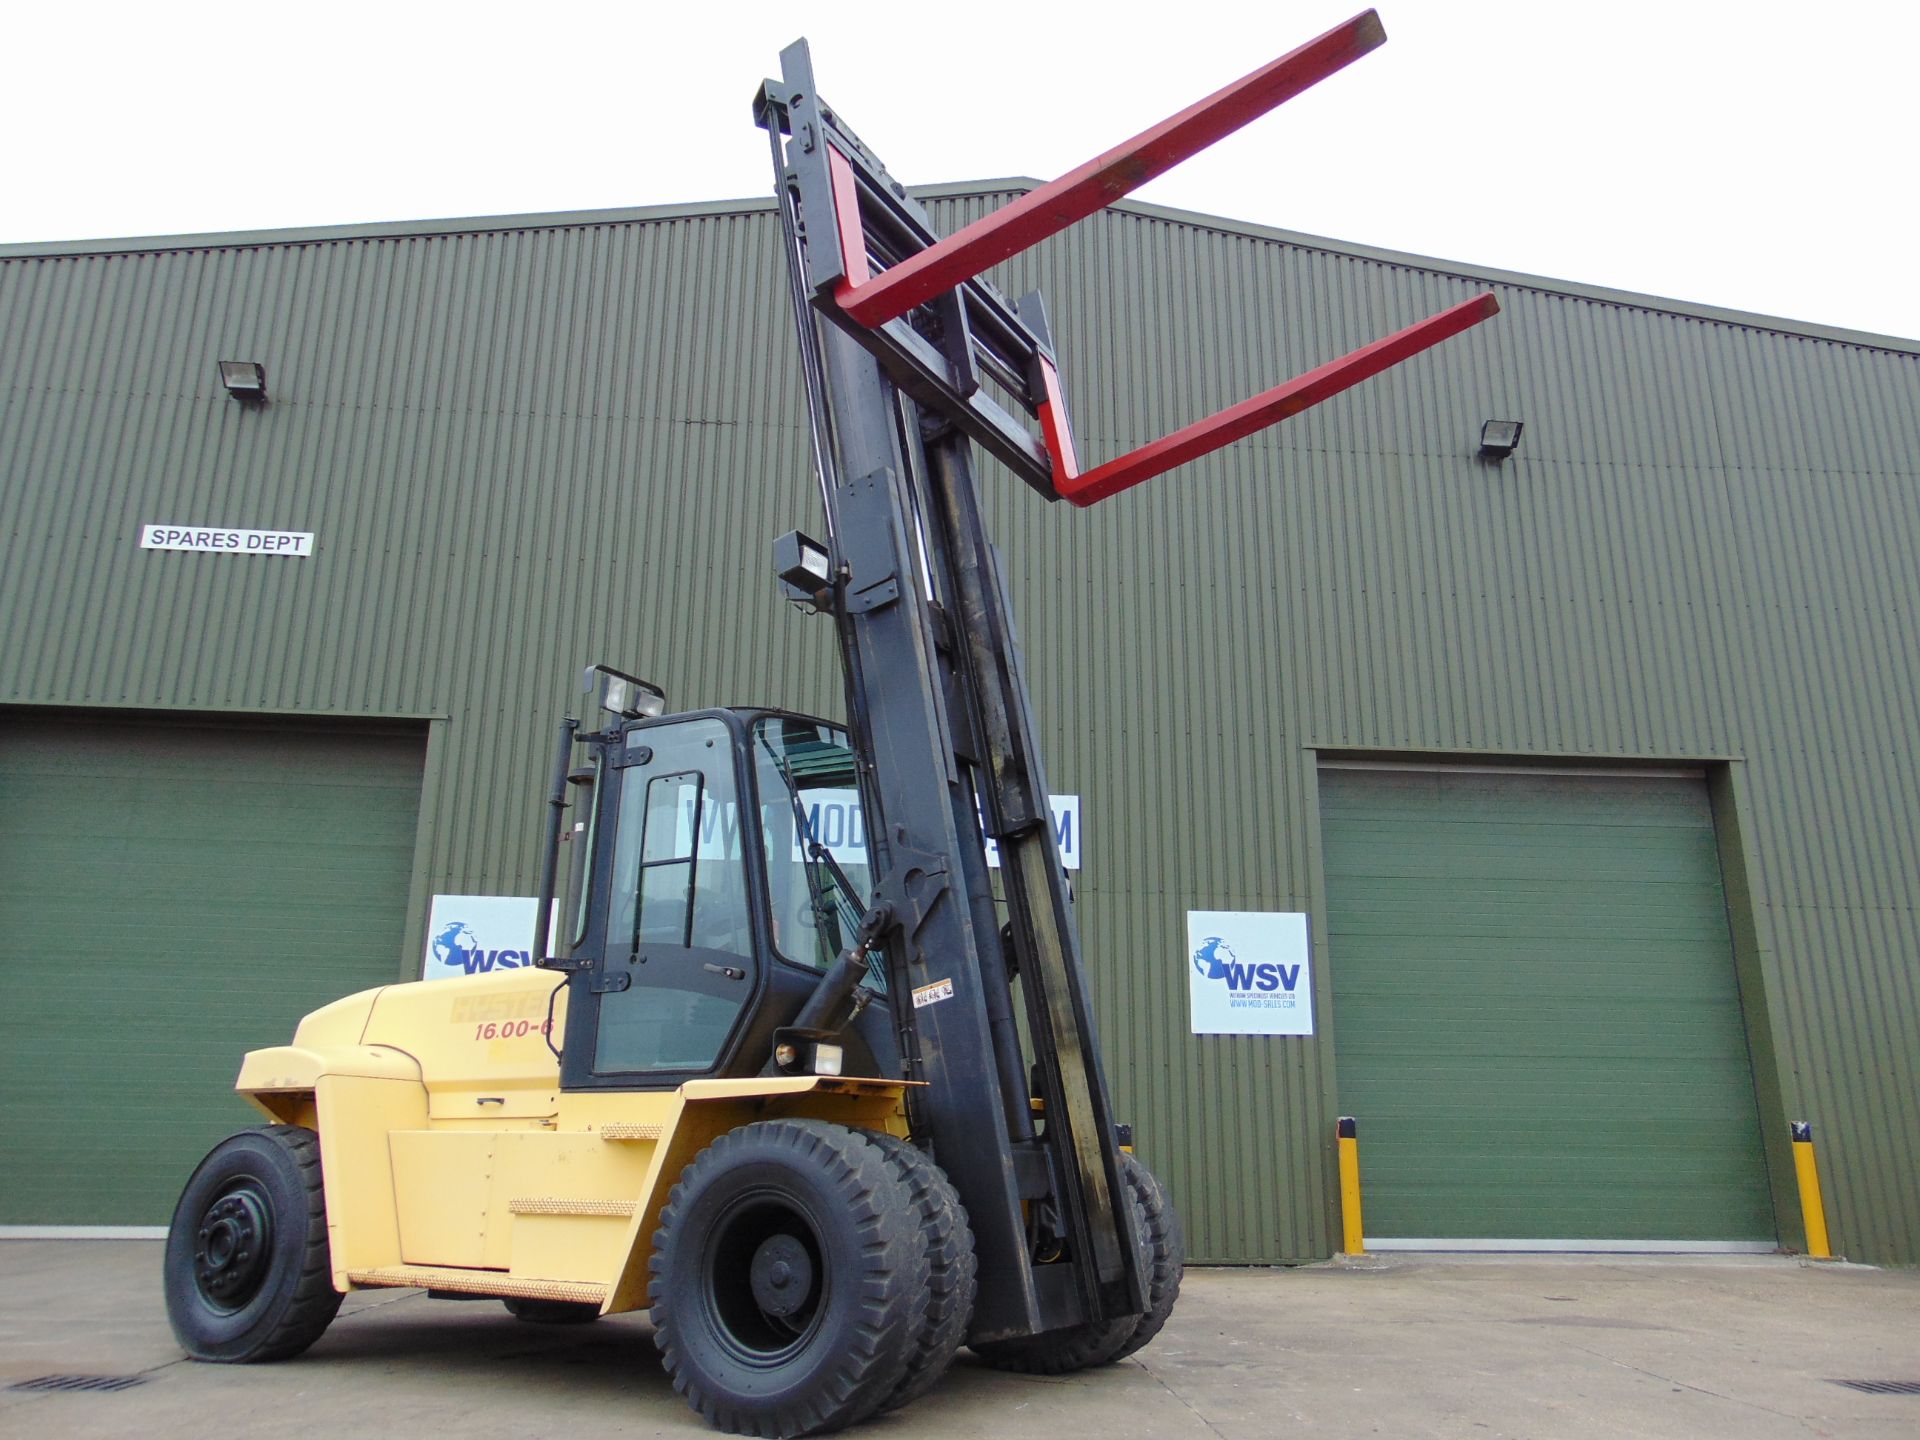 Ex Reserve Hyster H16.00 XM High capacity 16 Tonne Forklift ONLY 1,784 Hours! - Image 18 of 33